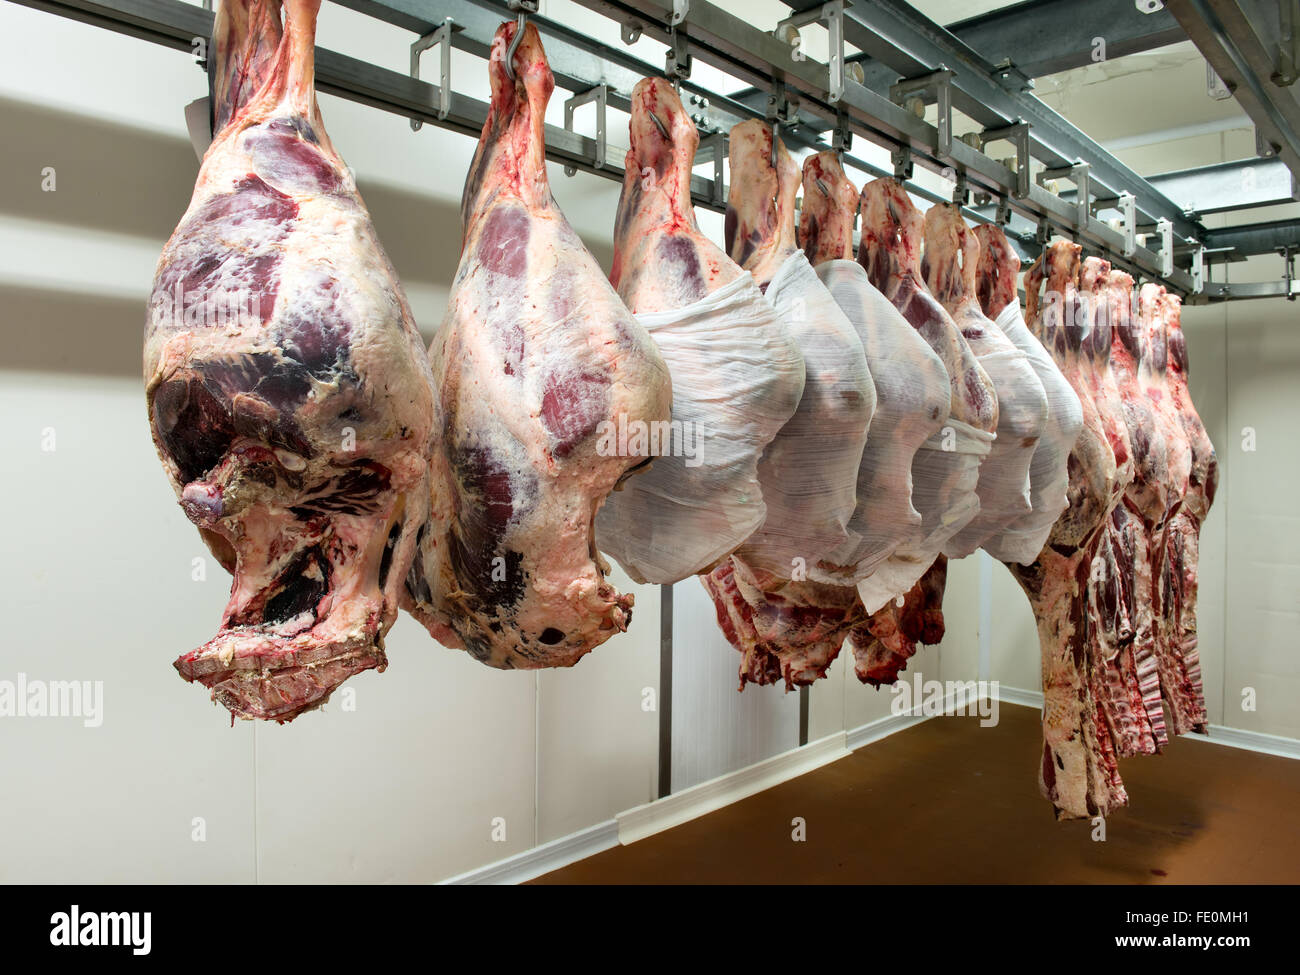 Large pieces of raw butchered meat hanging from metallic racks in food processing plant refrigeration room Stock Photo